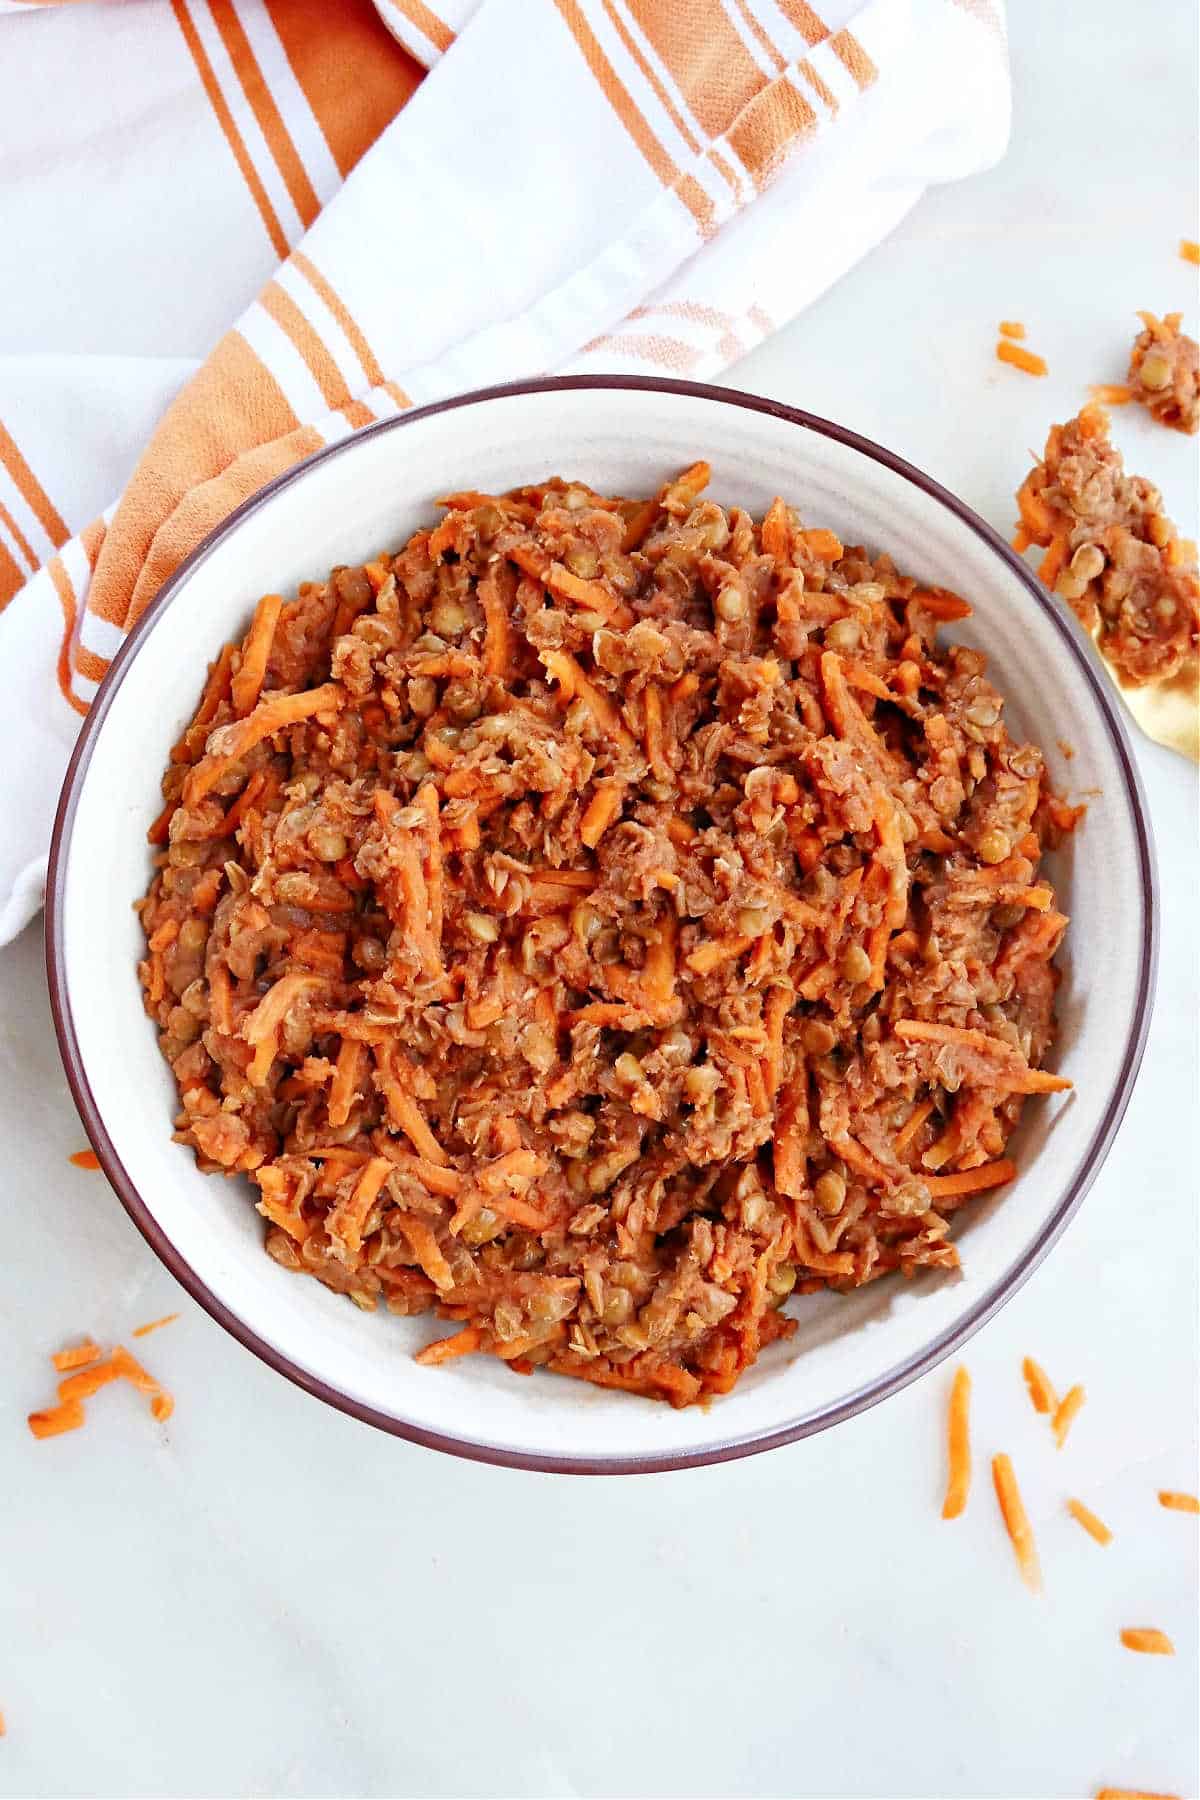 BBQ lentils with shredded carrots